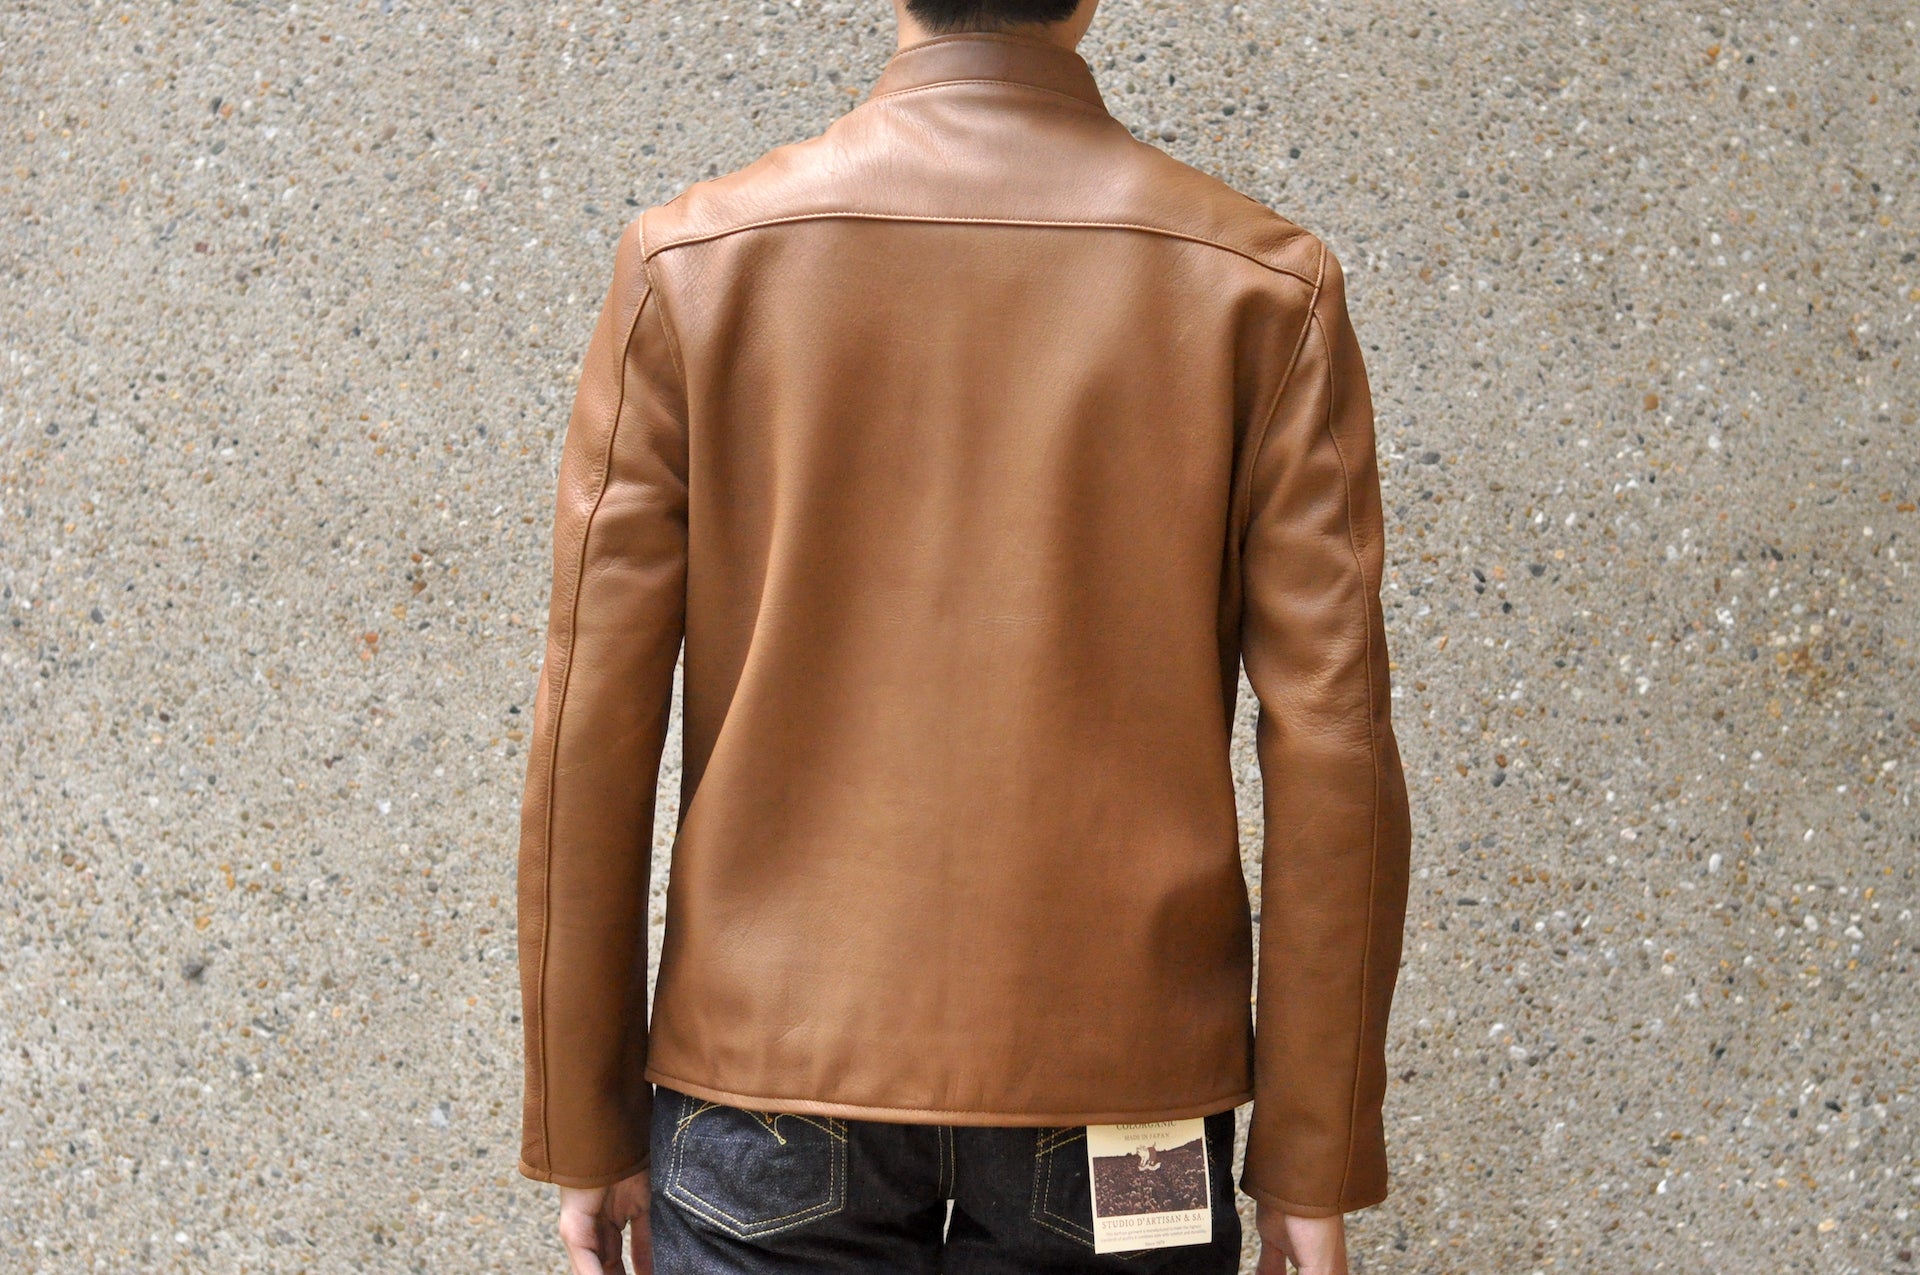 The Flat Head X CORLECTION Deerskin Stand Collar Single Riders Jacket (Brown)